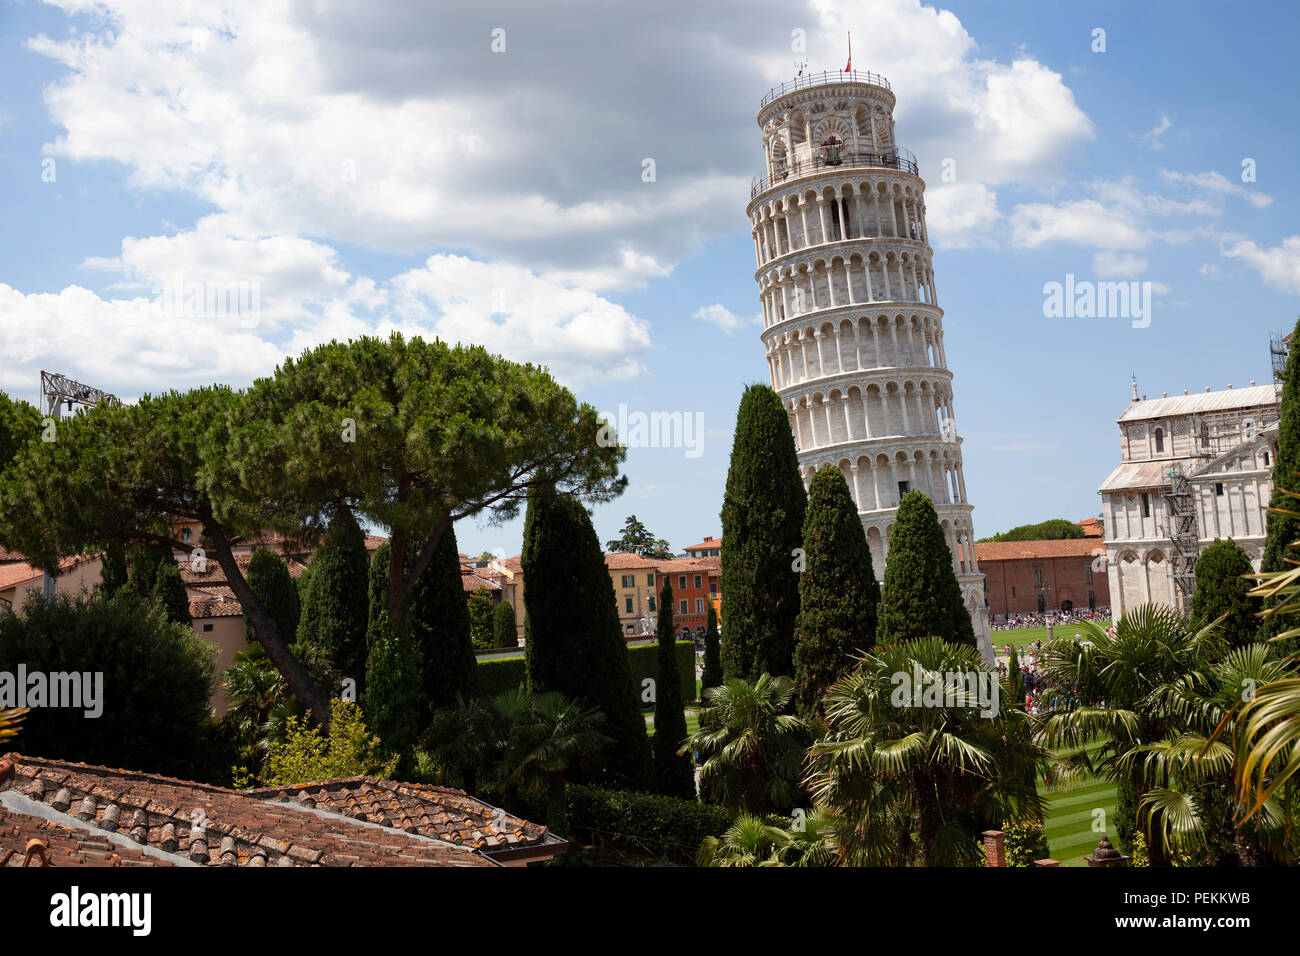 The Northern side of the Leaning Tower of Pisa (Tuscany) seen from an unusual visual angle. Le côté Nord de la Tour penchée de Pise (Toscane). Stock Photo